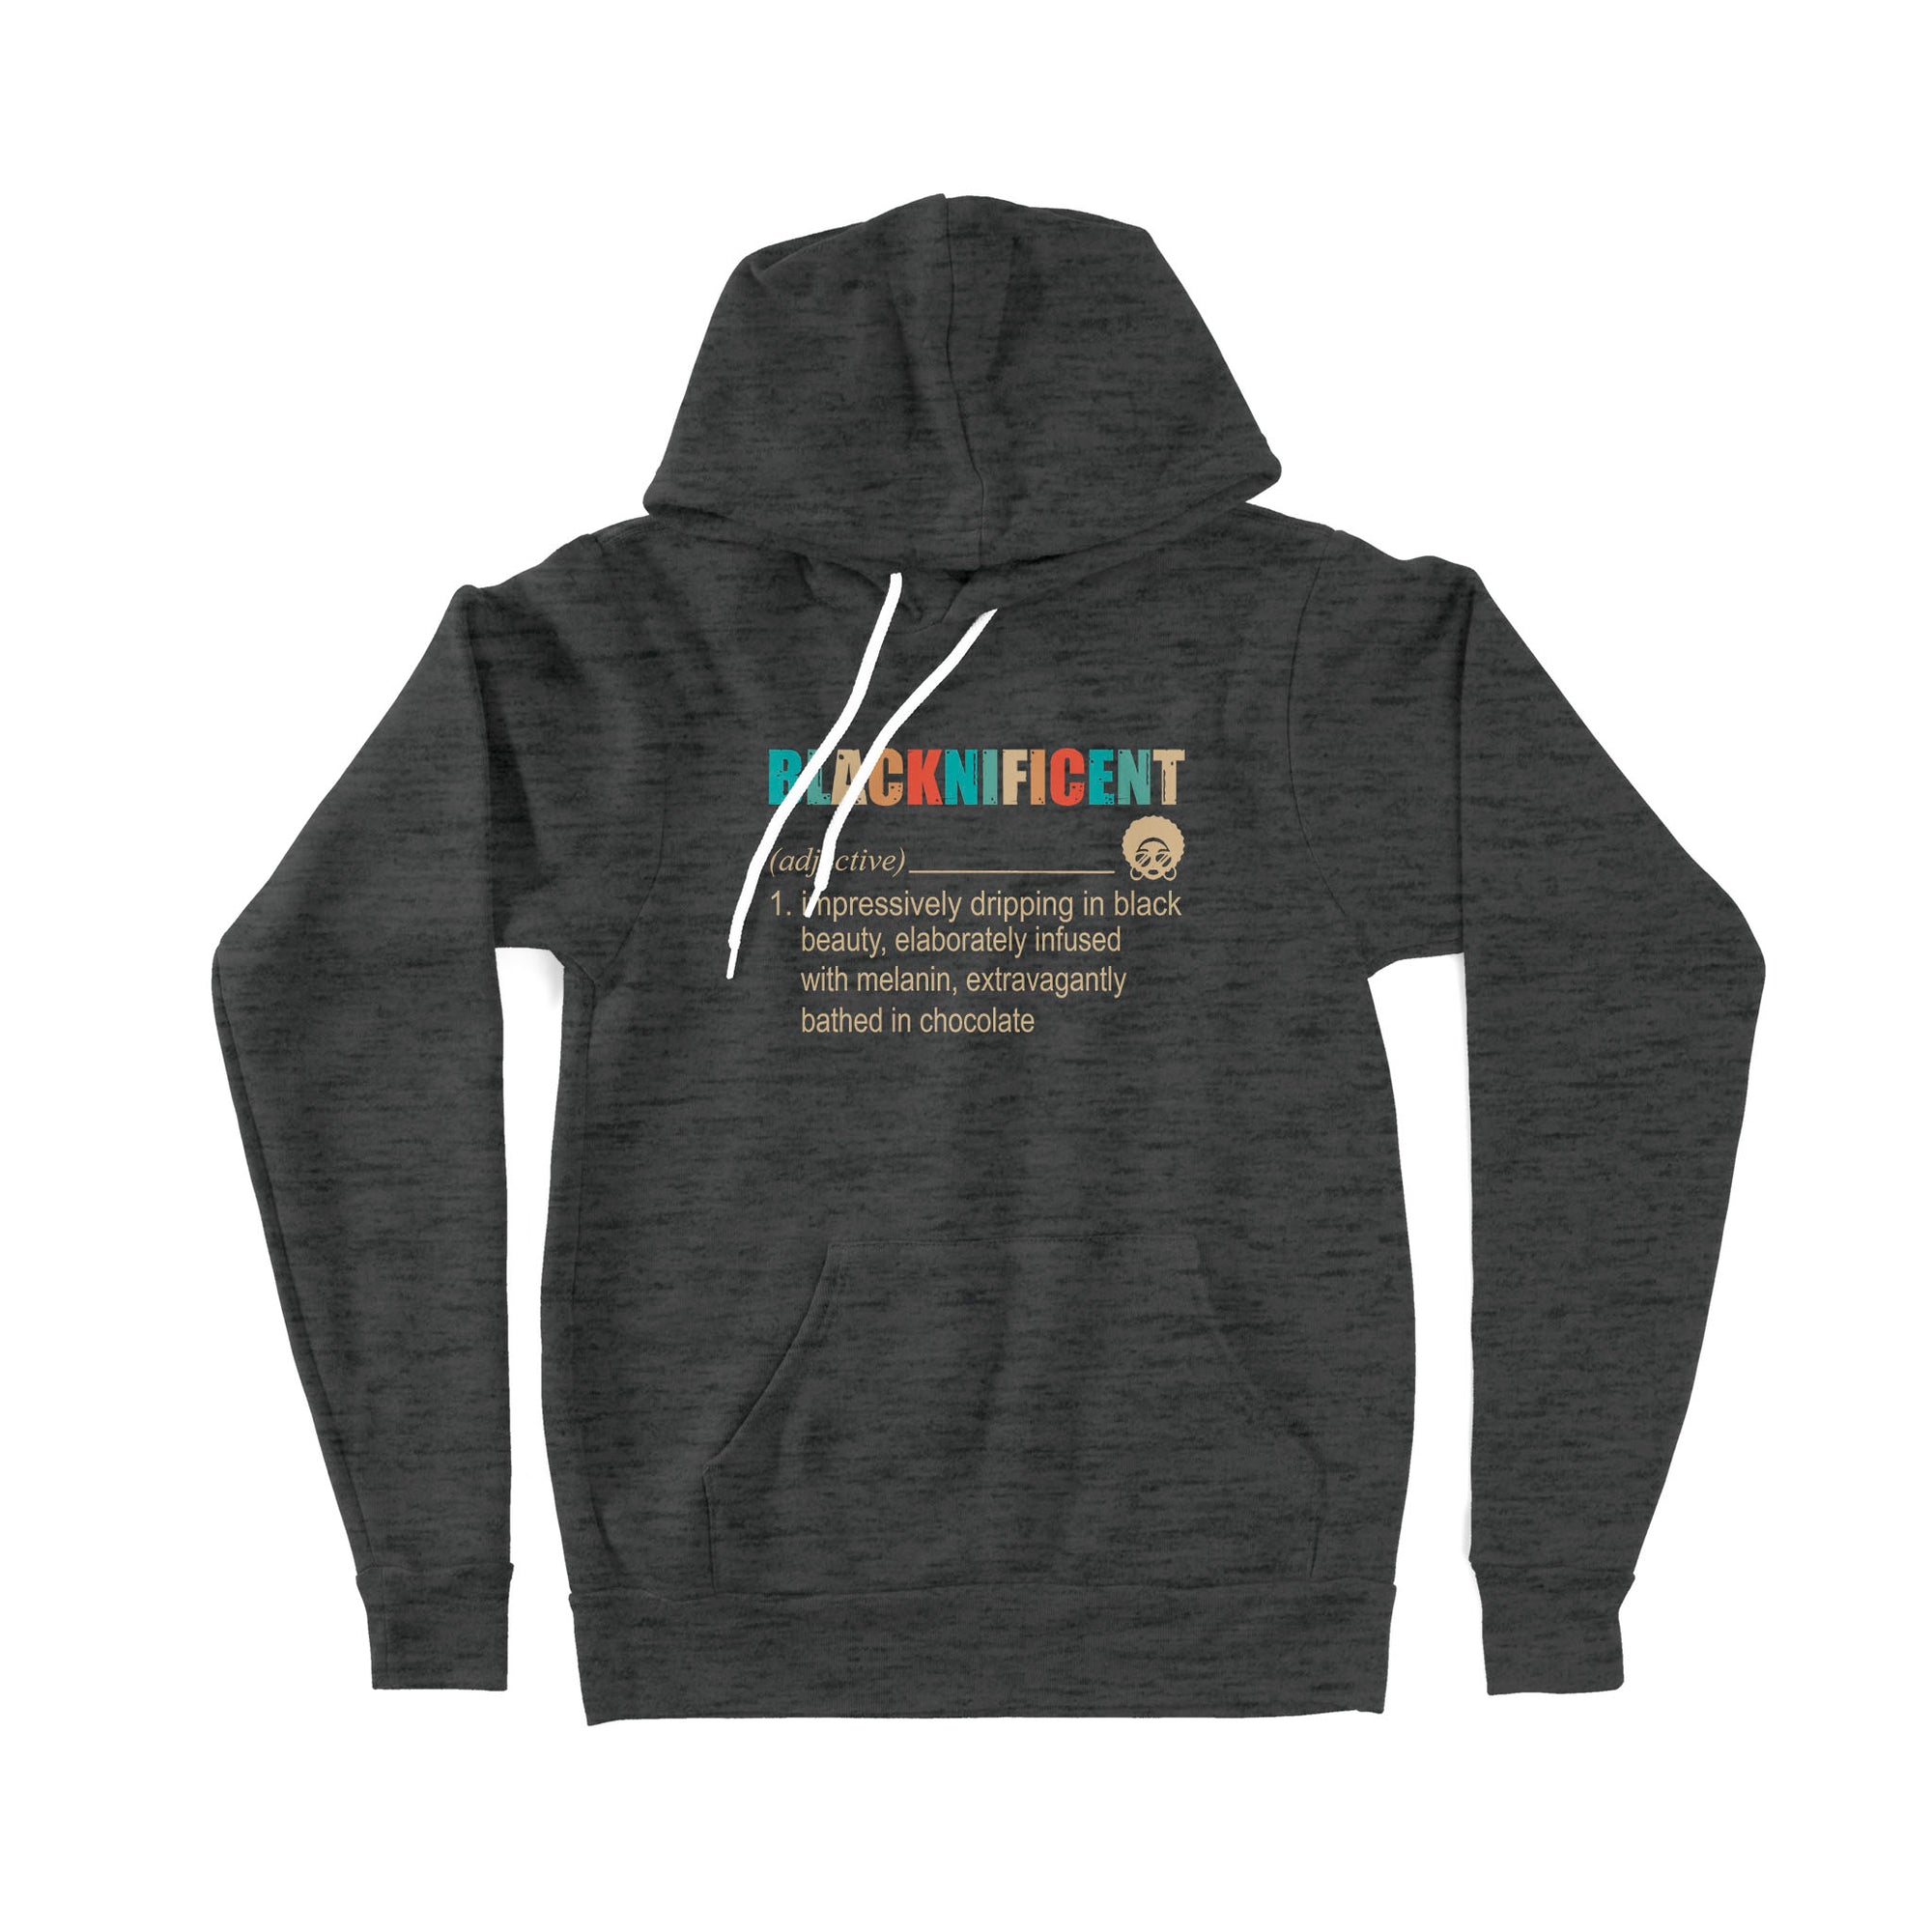 Blacknificent Definition Impressively Dripping In Black Beauty Melanin - Premium Hoodie